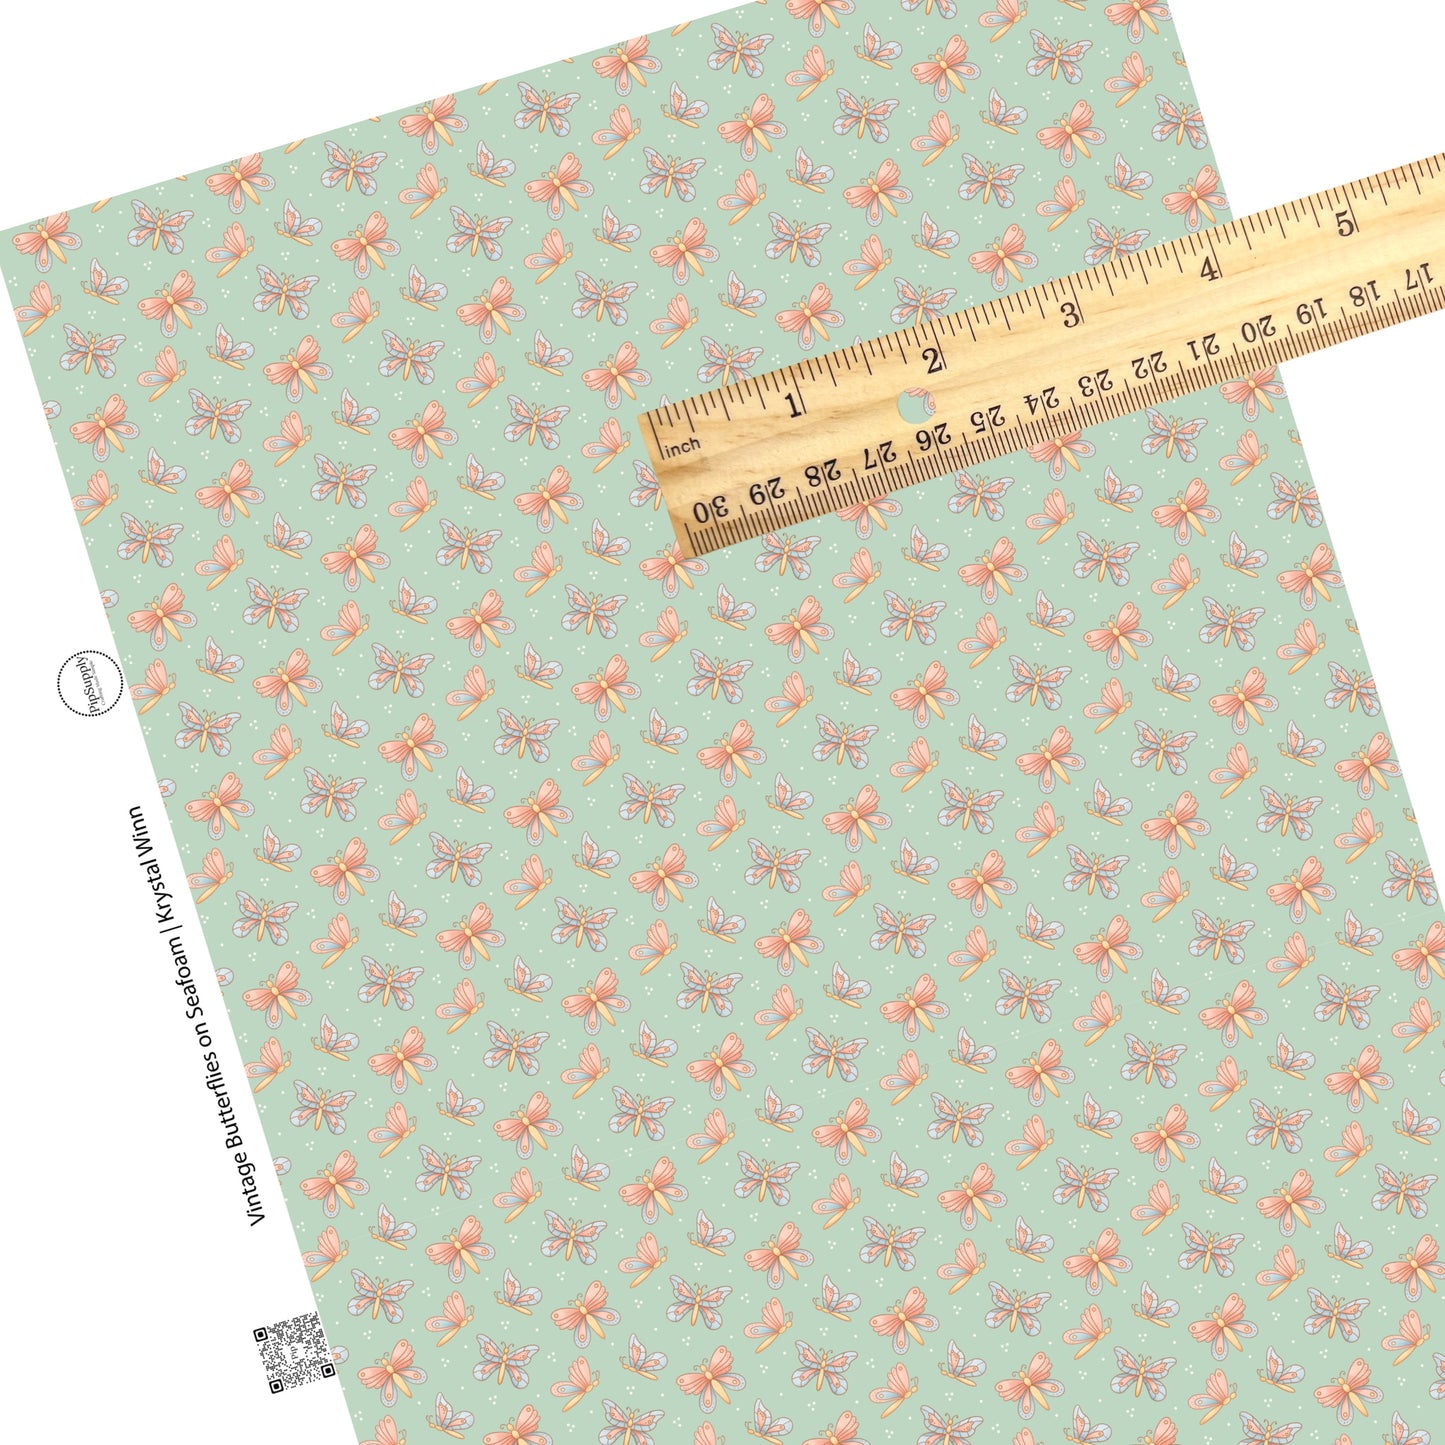 polka dots and butterflies on seafoam faux leather sheets